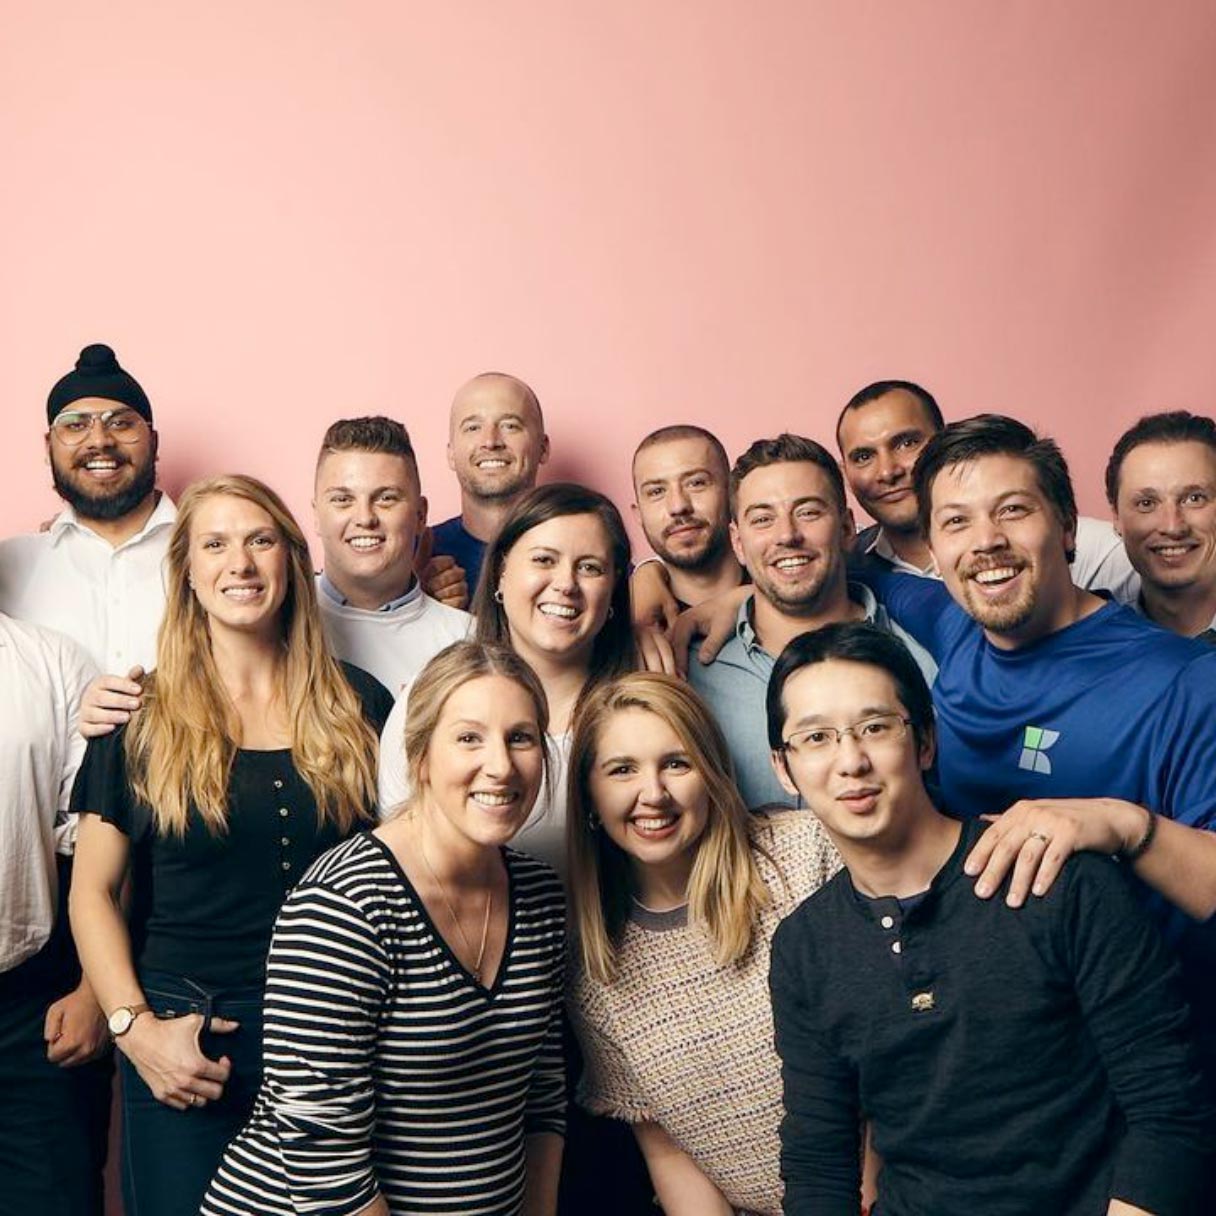 Photo of the kite team smiling infront of pink backdrop